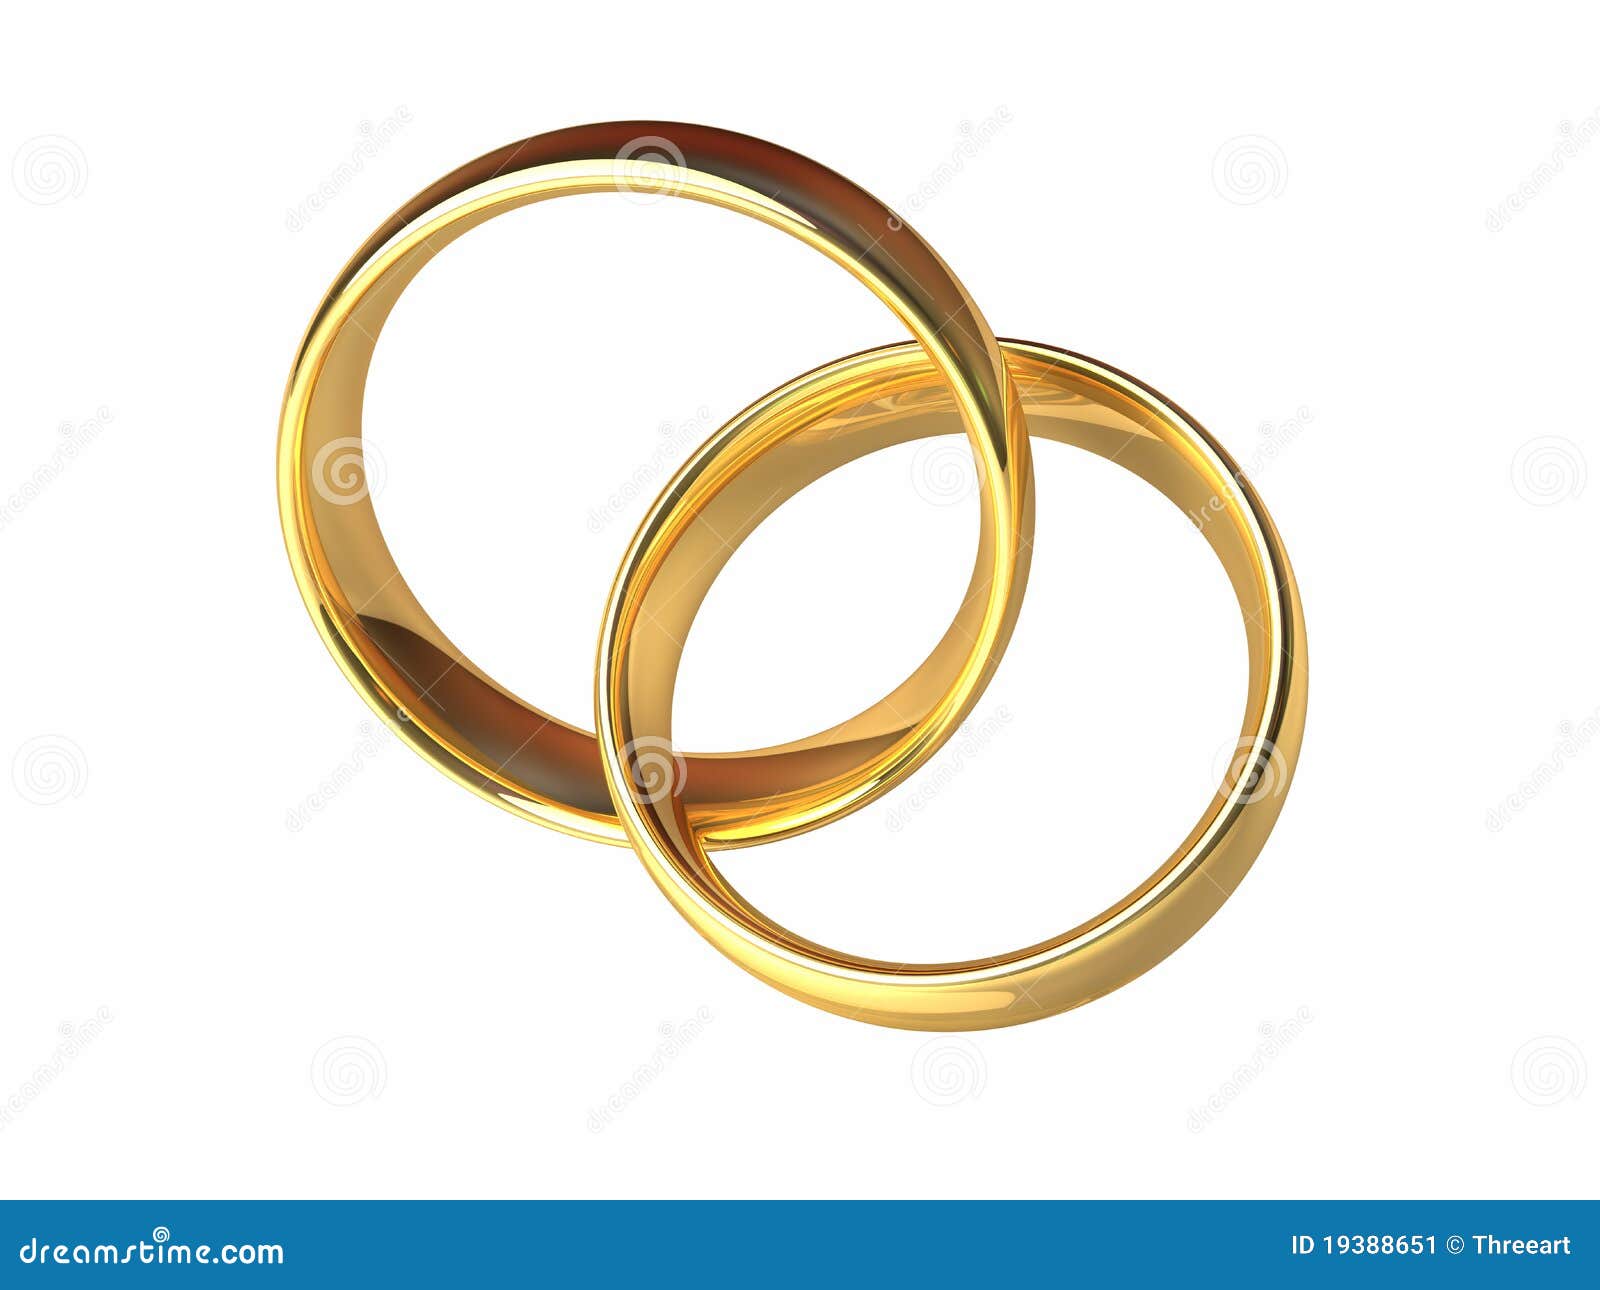 gold wedding rings together 19388651